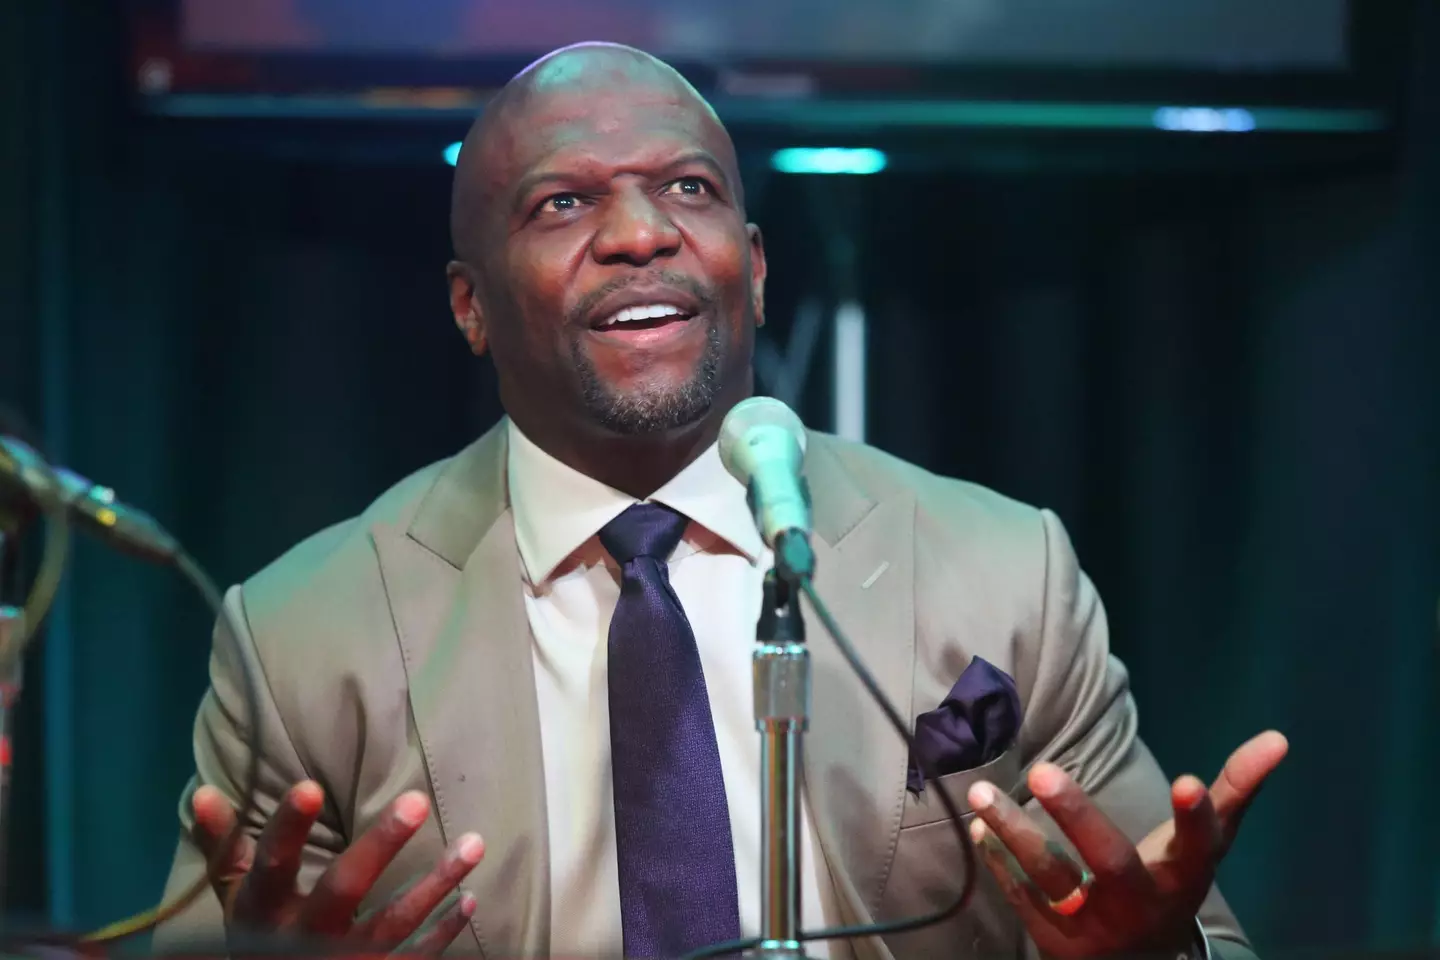 Brooklyn Nine-Nine actor Terry Crews speaks out about the Will Smith and Chris Rock Oscars incident.